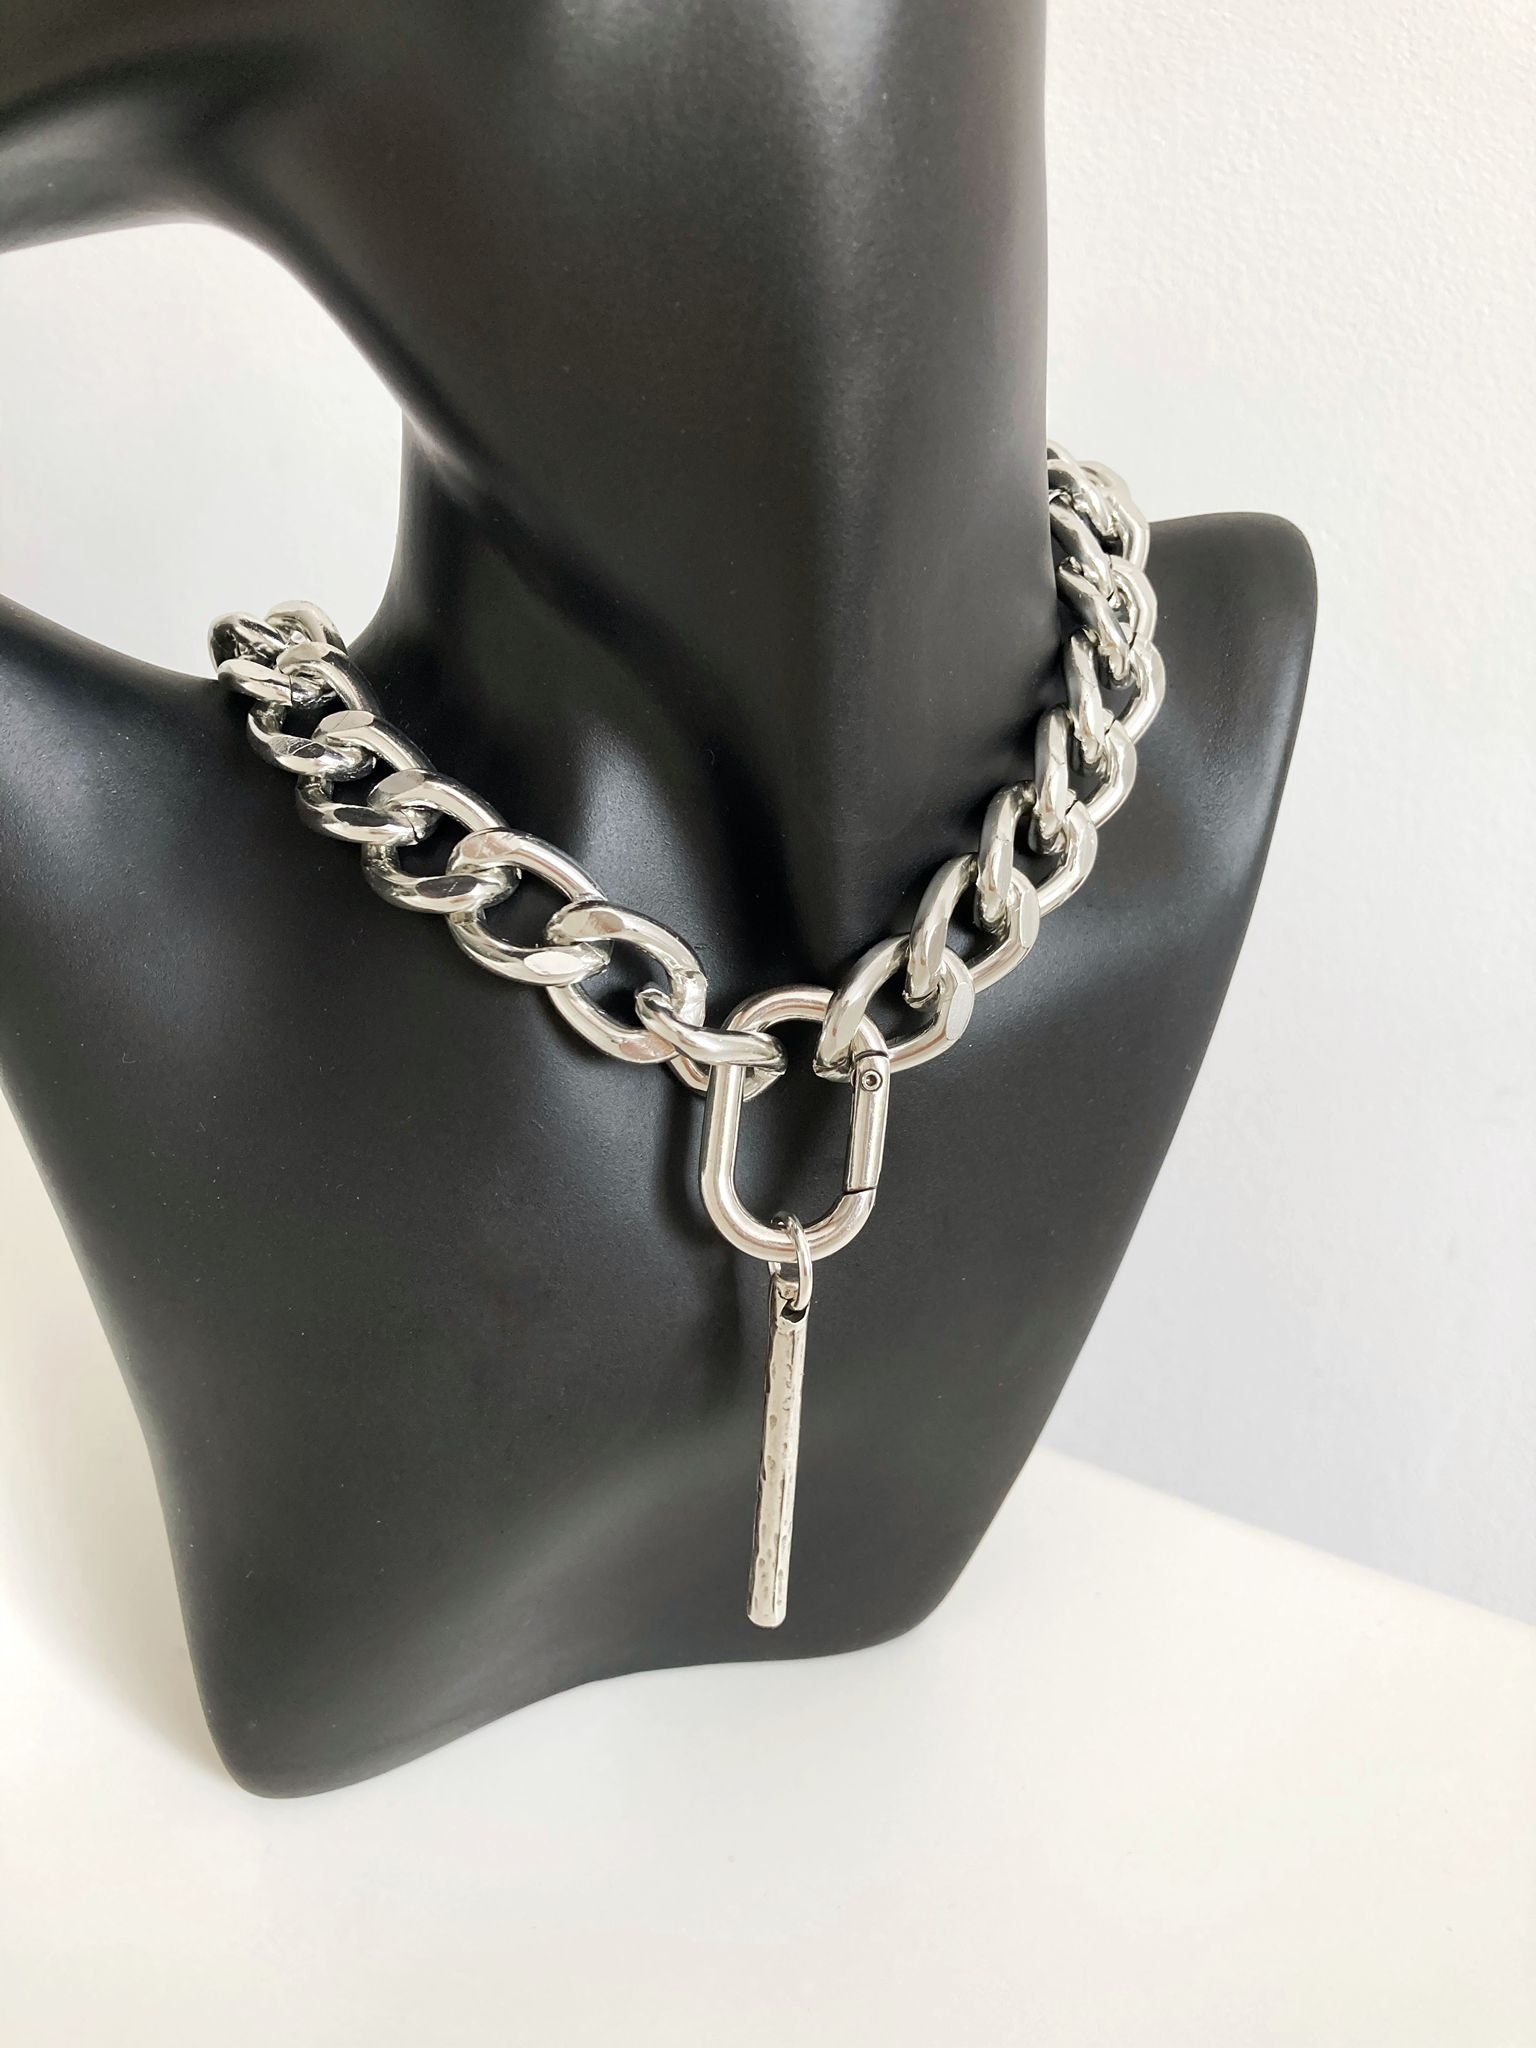 Silver Extravagant Lightweight Choker, XL Aluminum Chain Necklace,  Carabiner Clasp Chain, Womens Oversized Glossy Chunky Choker, Womens Gift -  Etsy